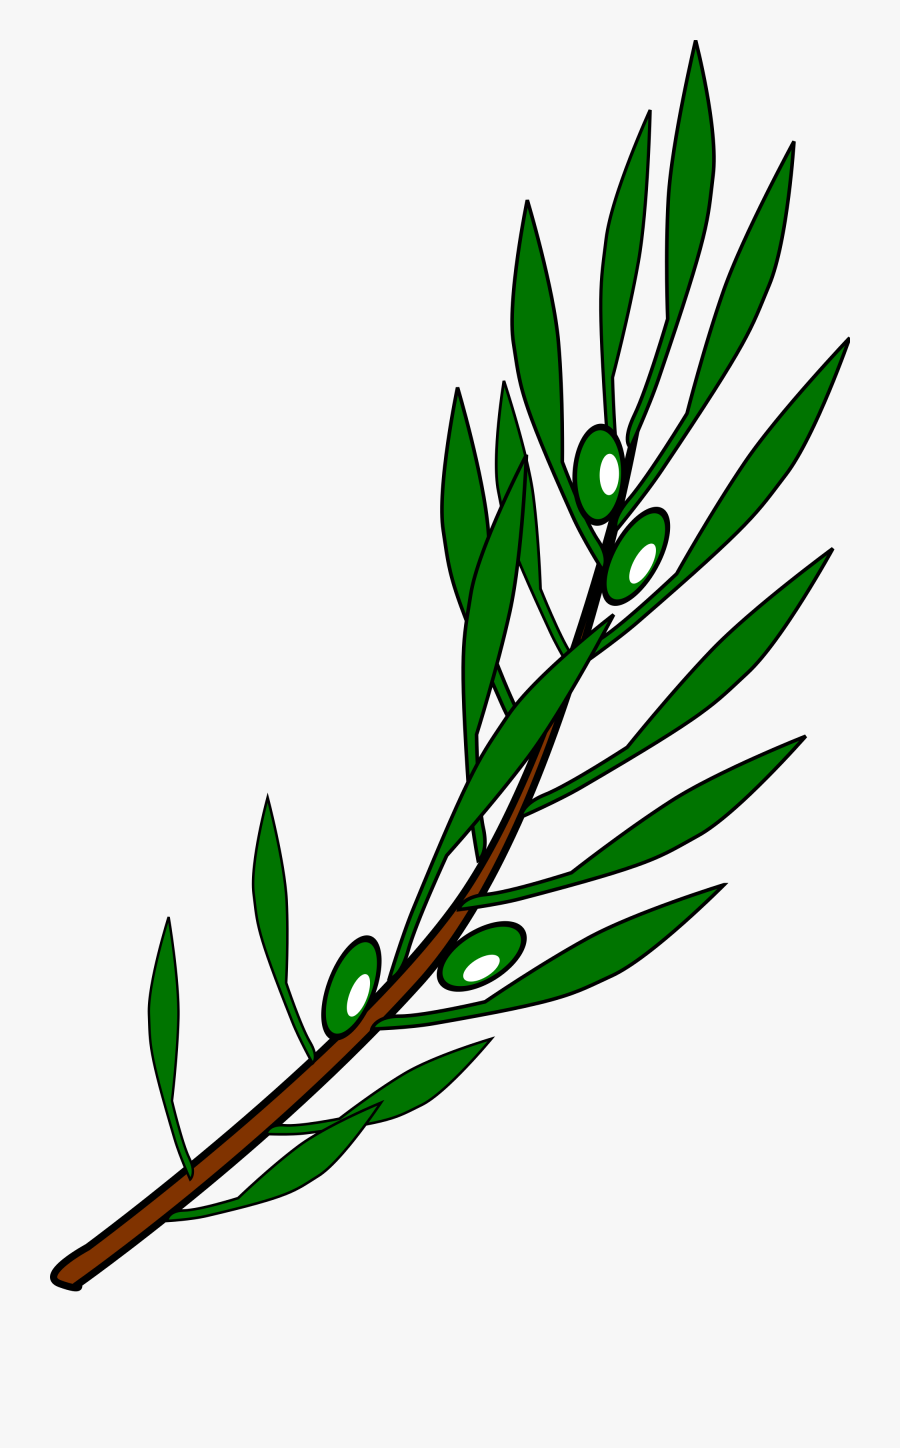 Olive Branch Vector Png - Olive Branch Drawing, Transparent Clipart